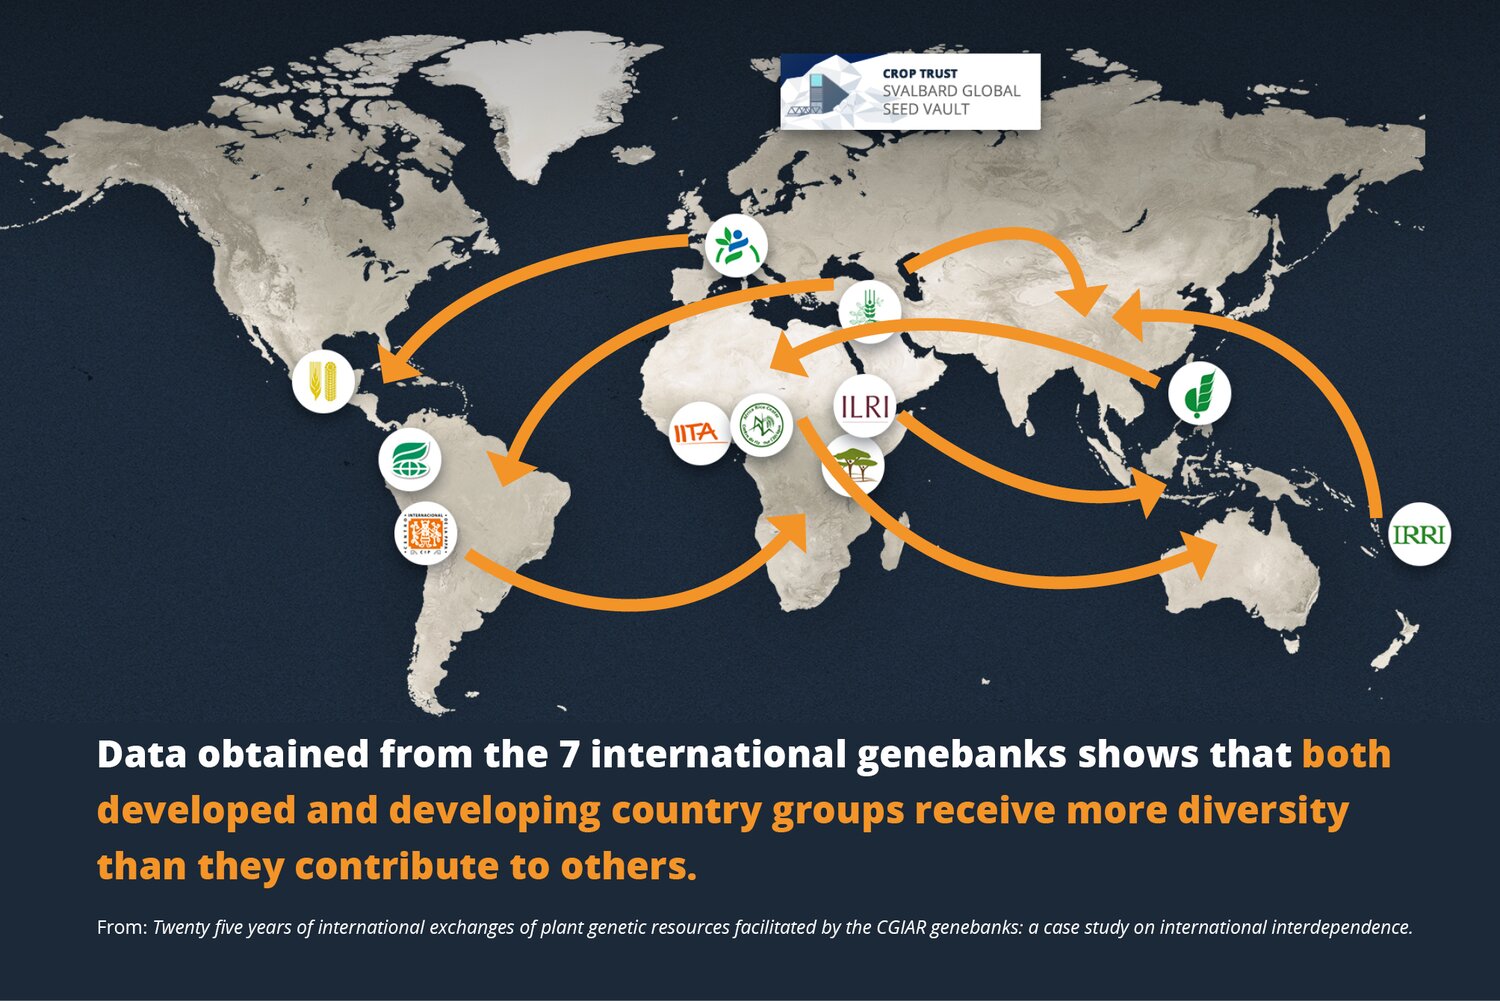 Even diversity-rich countries, where centers of origin are found, are not self-sufficient in germaplasm and require significant amounts from the international genebanks.